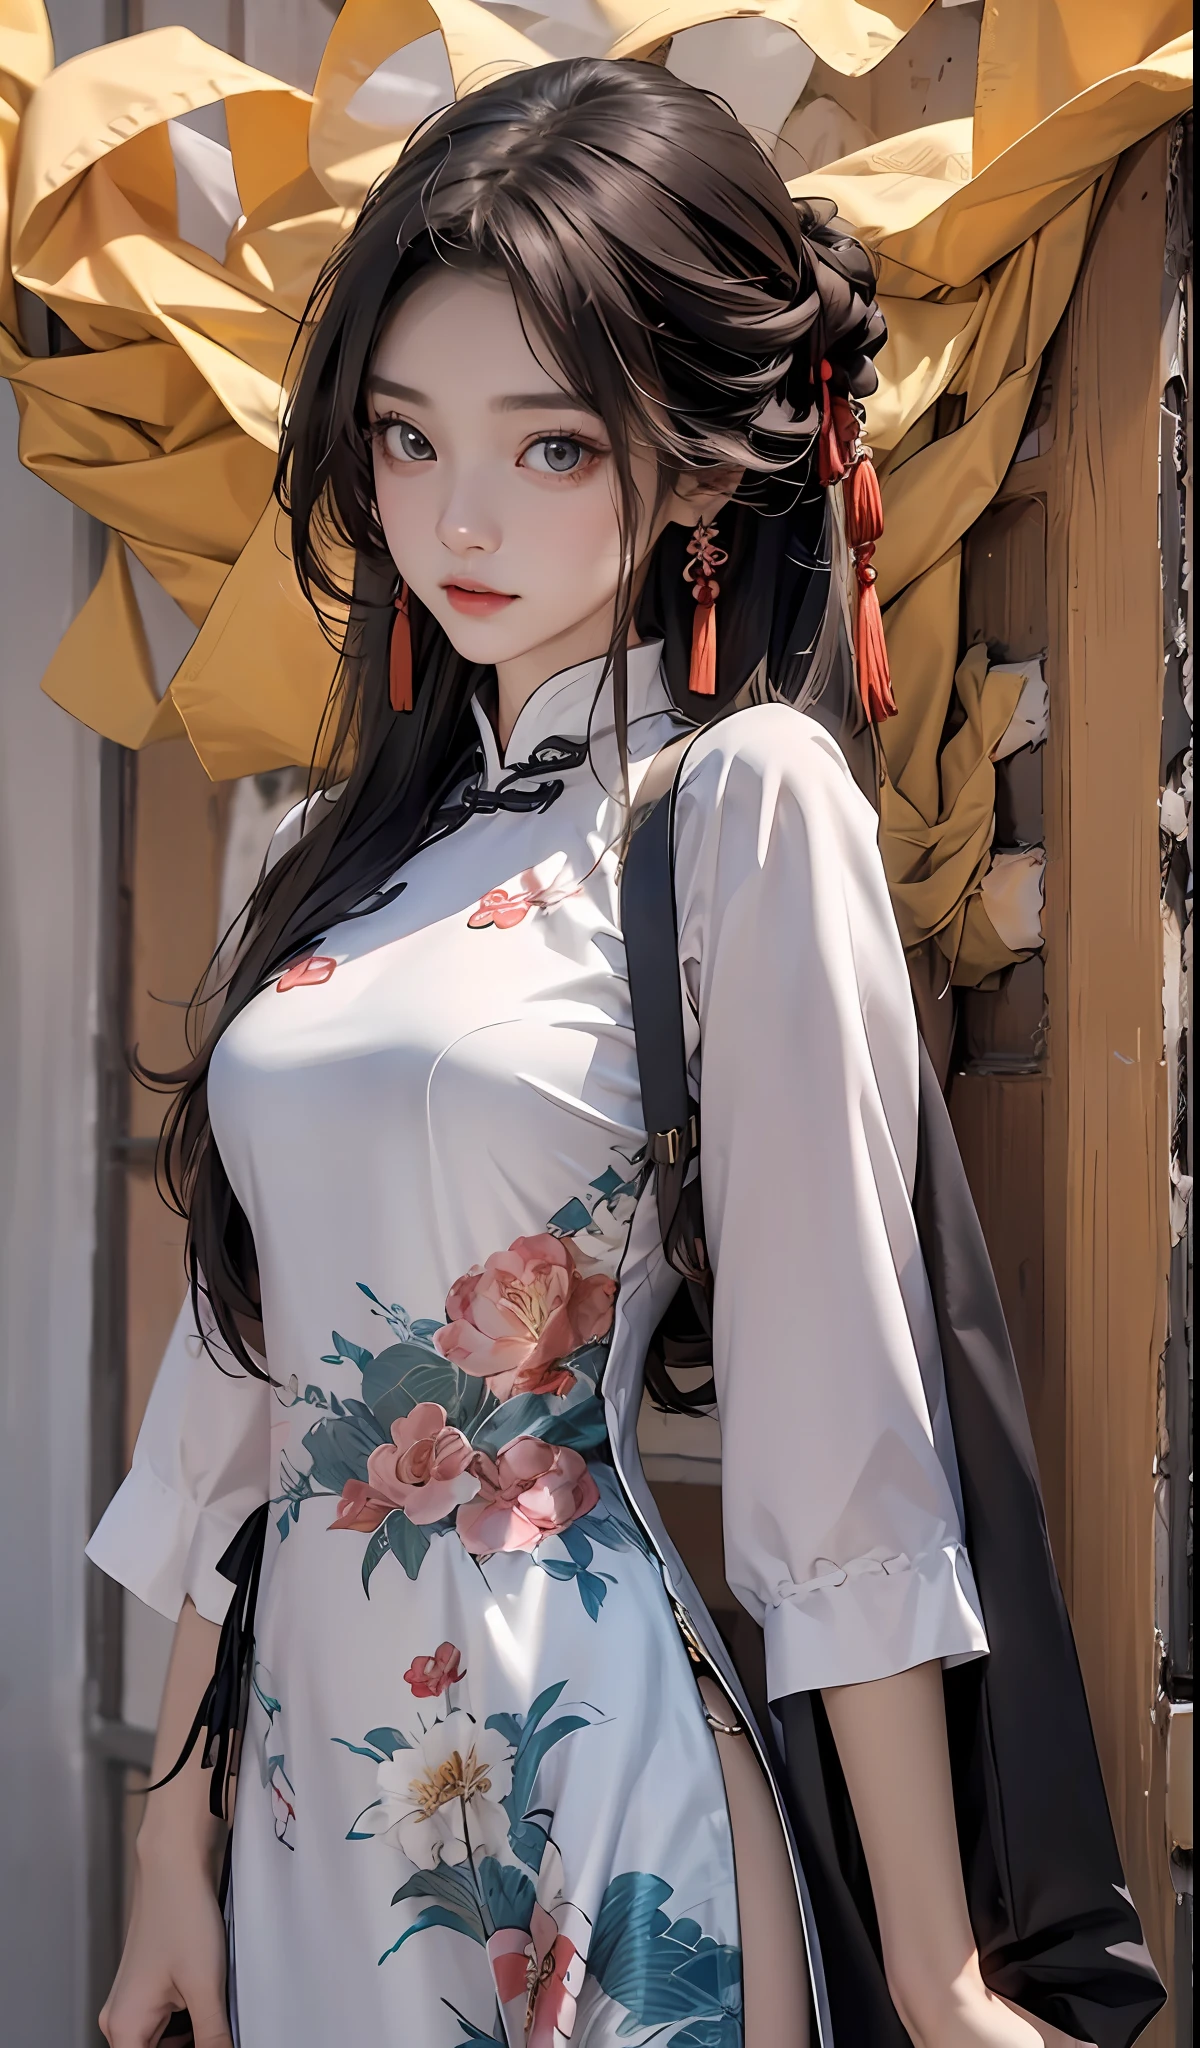 best quality, master, highres, wuxia1girl, china dress, super Beautiful face, super beautiful eye, Super beautiful hair Super beautiful face，Super beautiful eyes，Super beautiful hair，